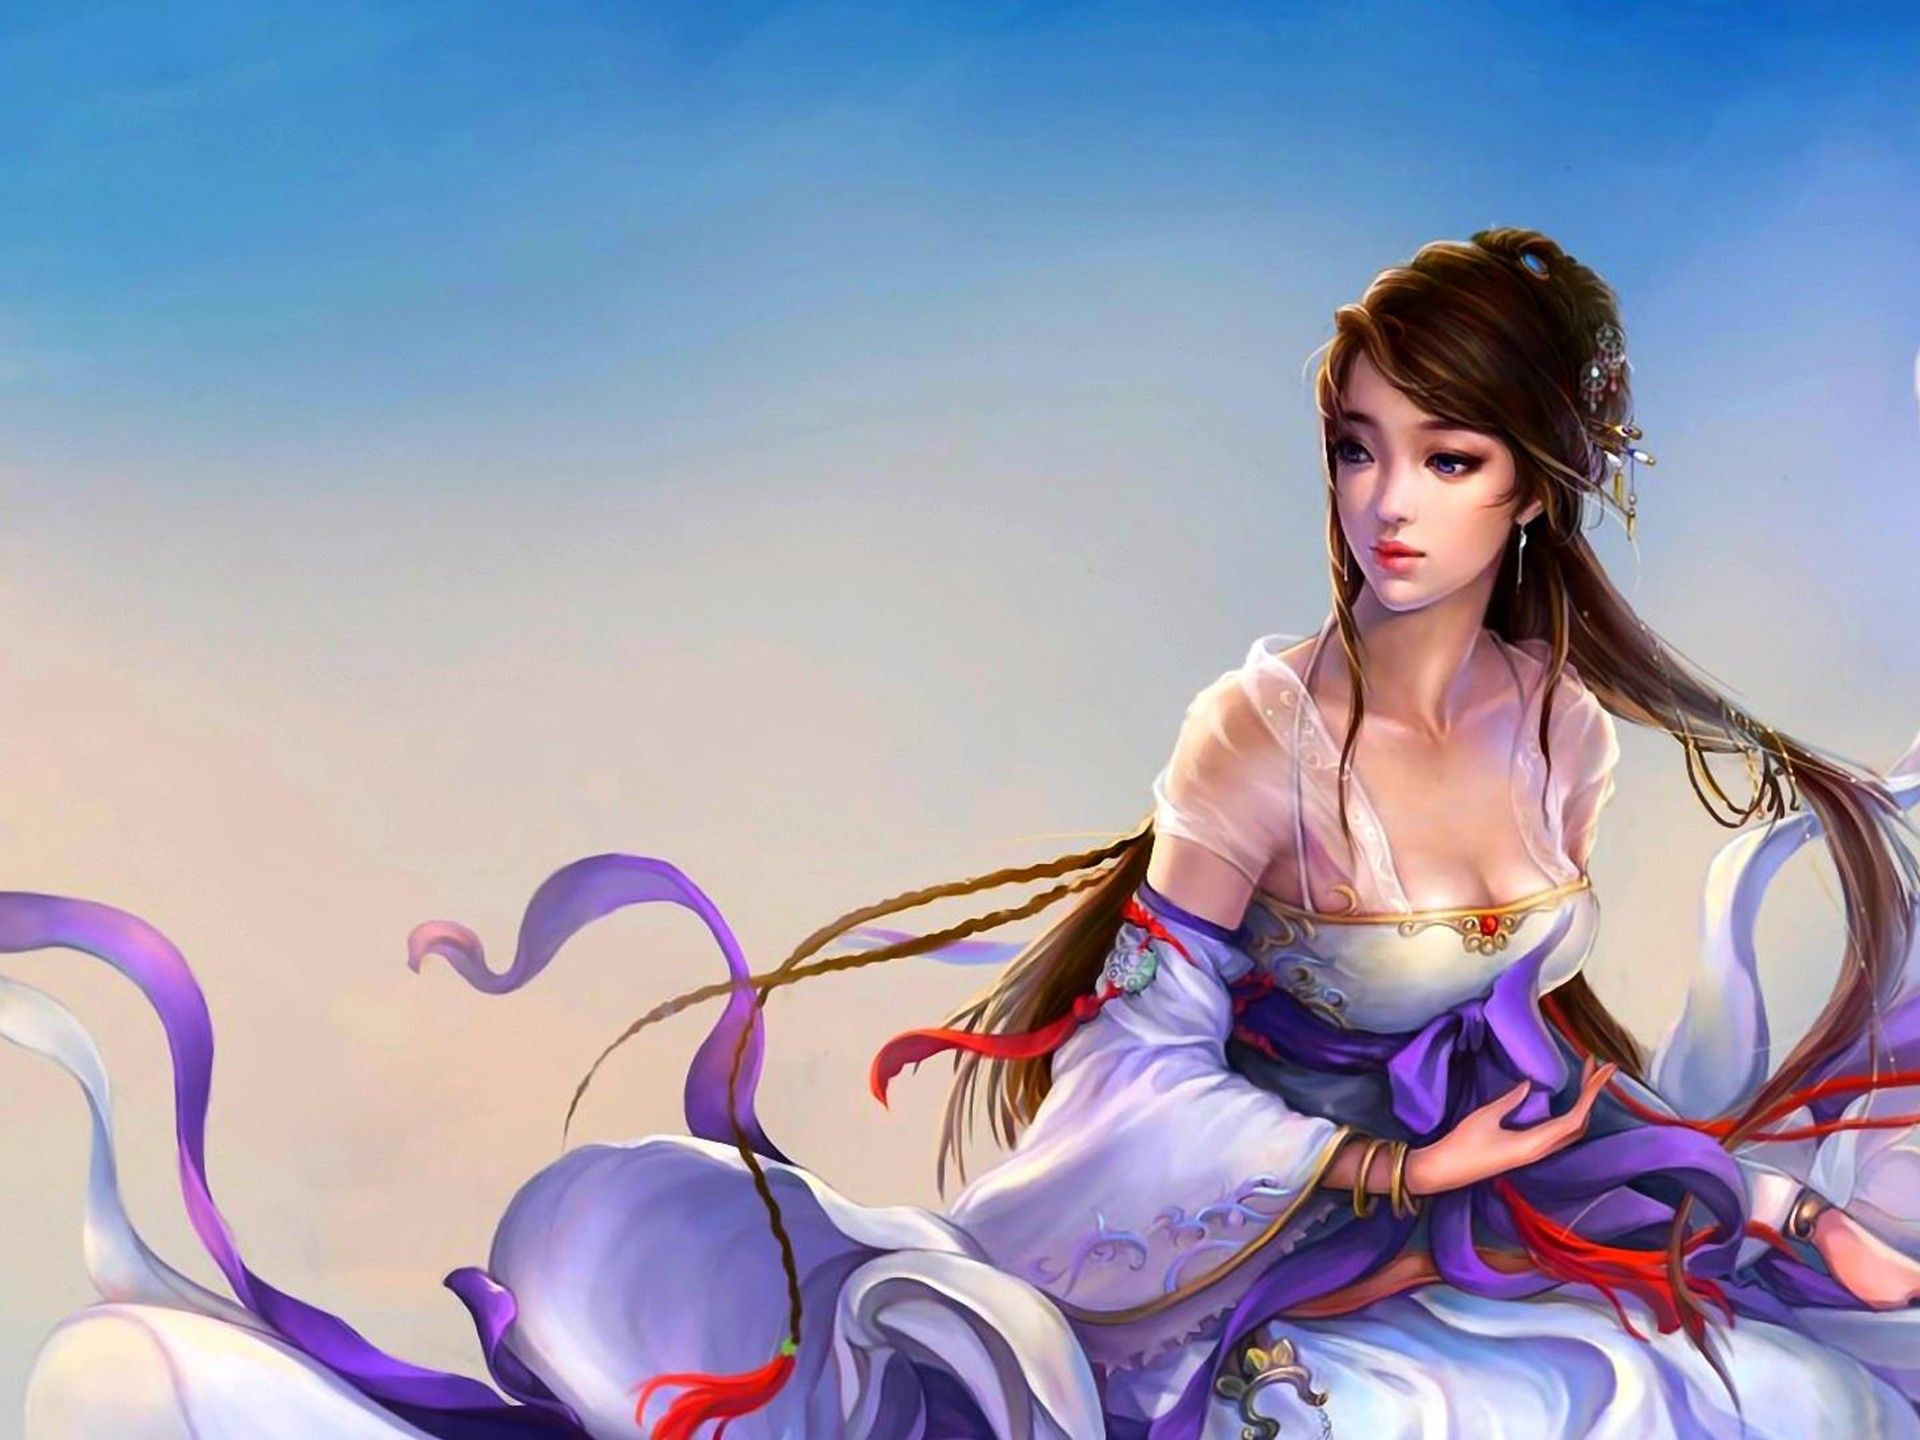 Beautiful Chinese Anime GirlWallpapers